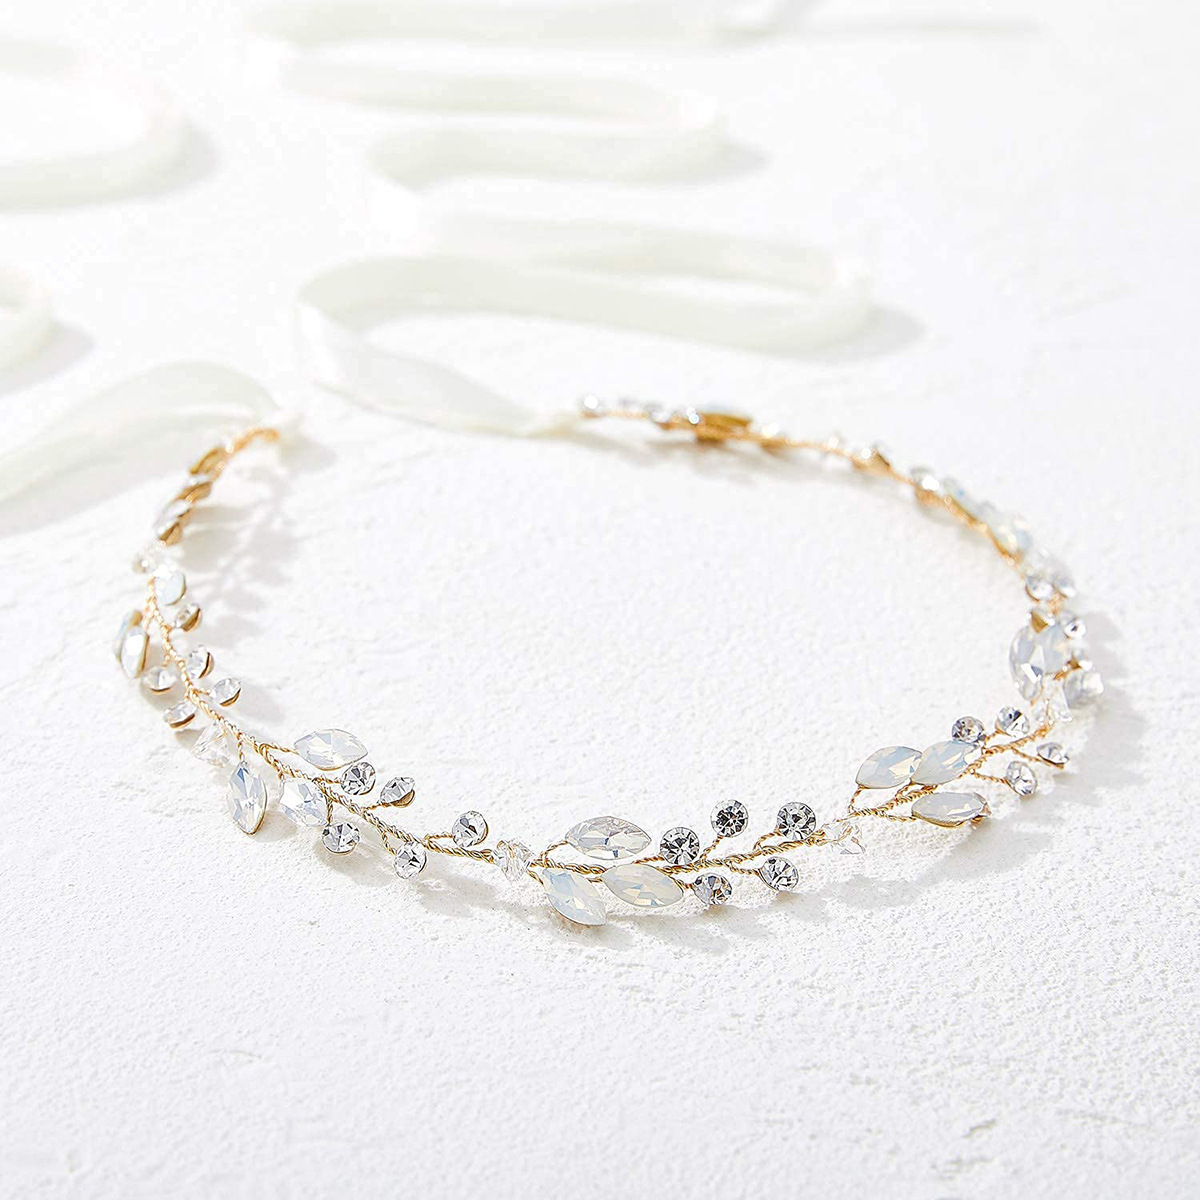 1:Gold-tone protein diamond with hair band